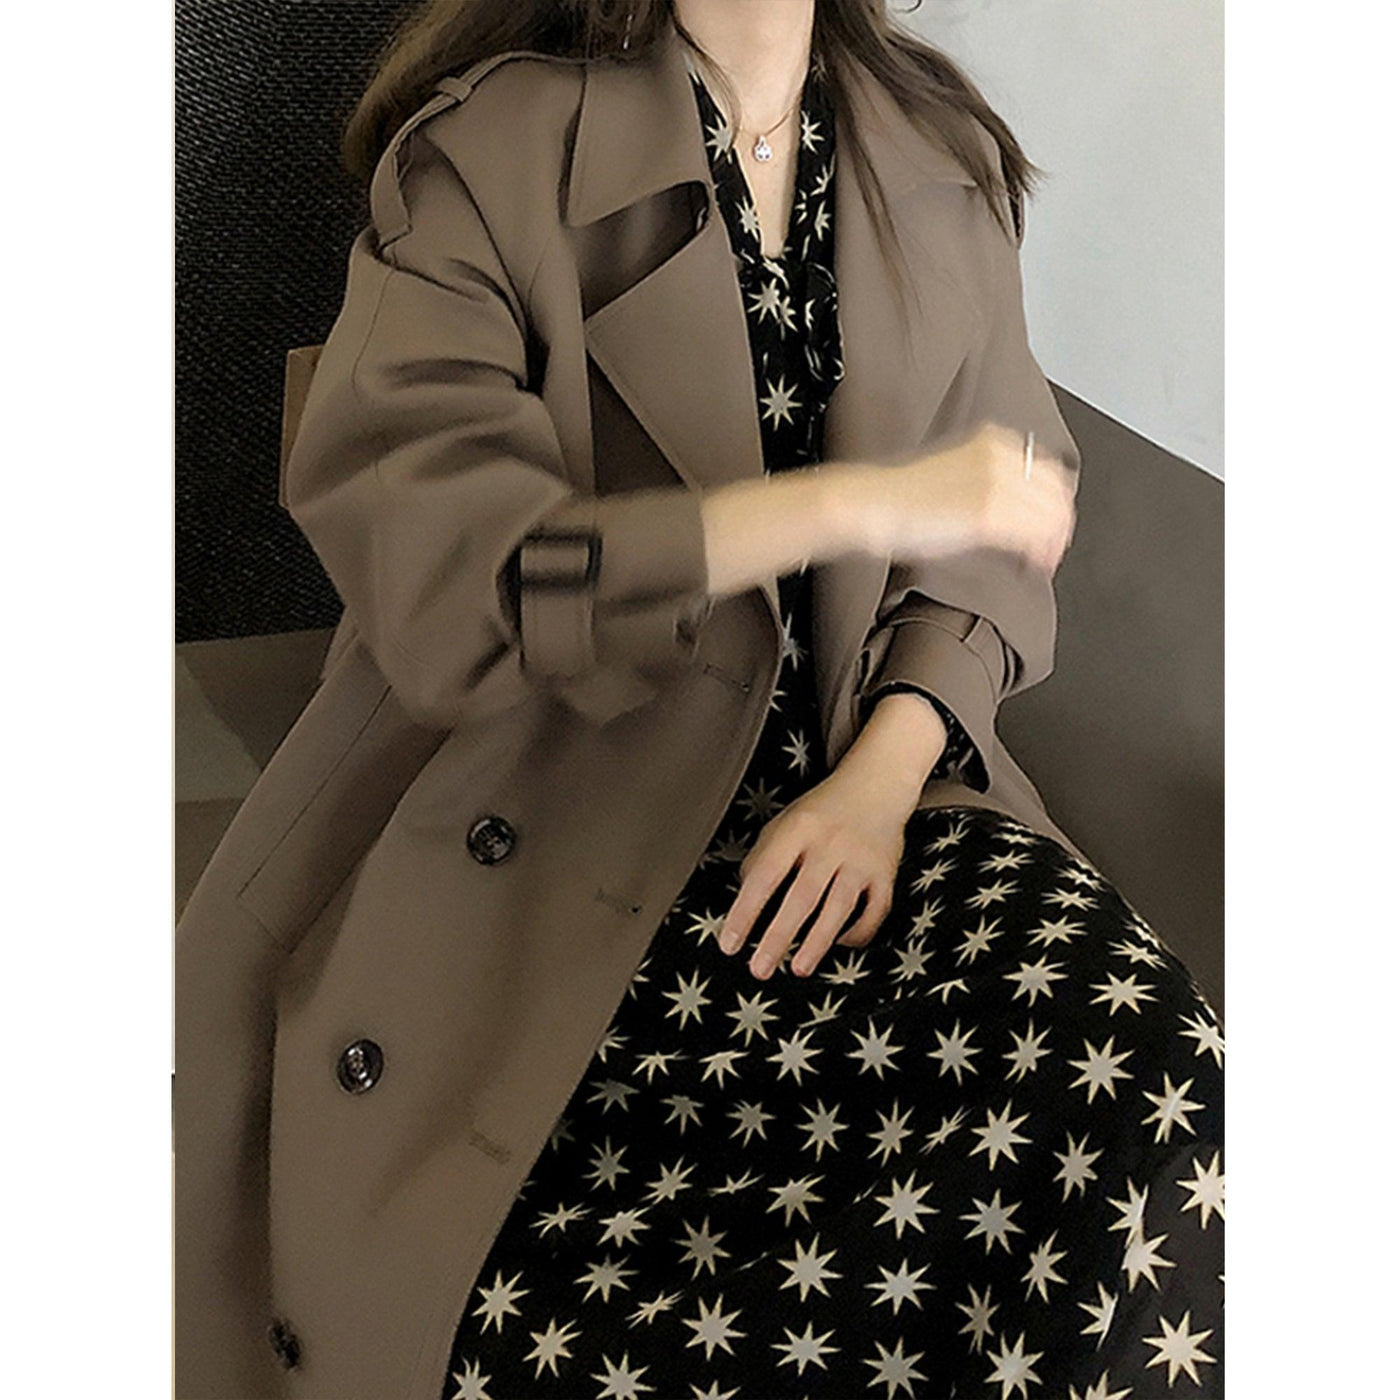 Women Trendy Trench Coat, Double Breasted Coat, Korean Women's Trench Coat, Elegant Oversize Trench Coat, Spring Clothing, Womens Clothing | MODE BY OH